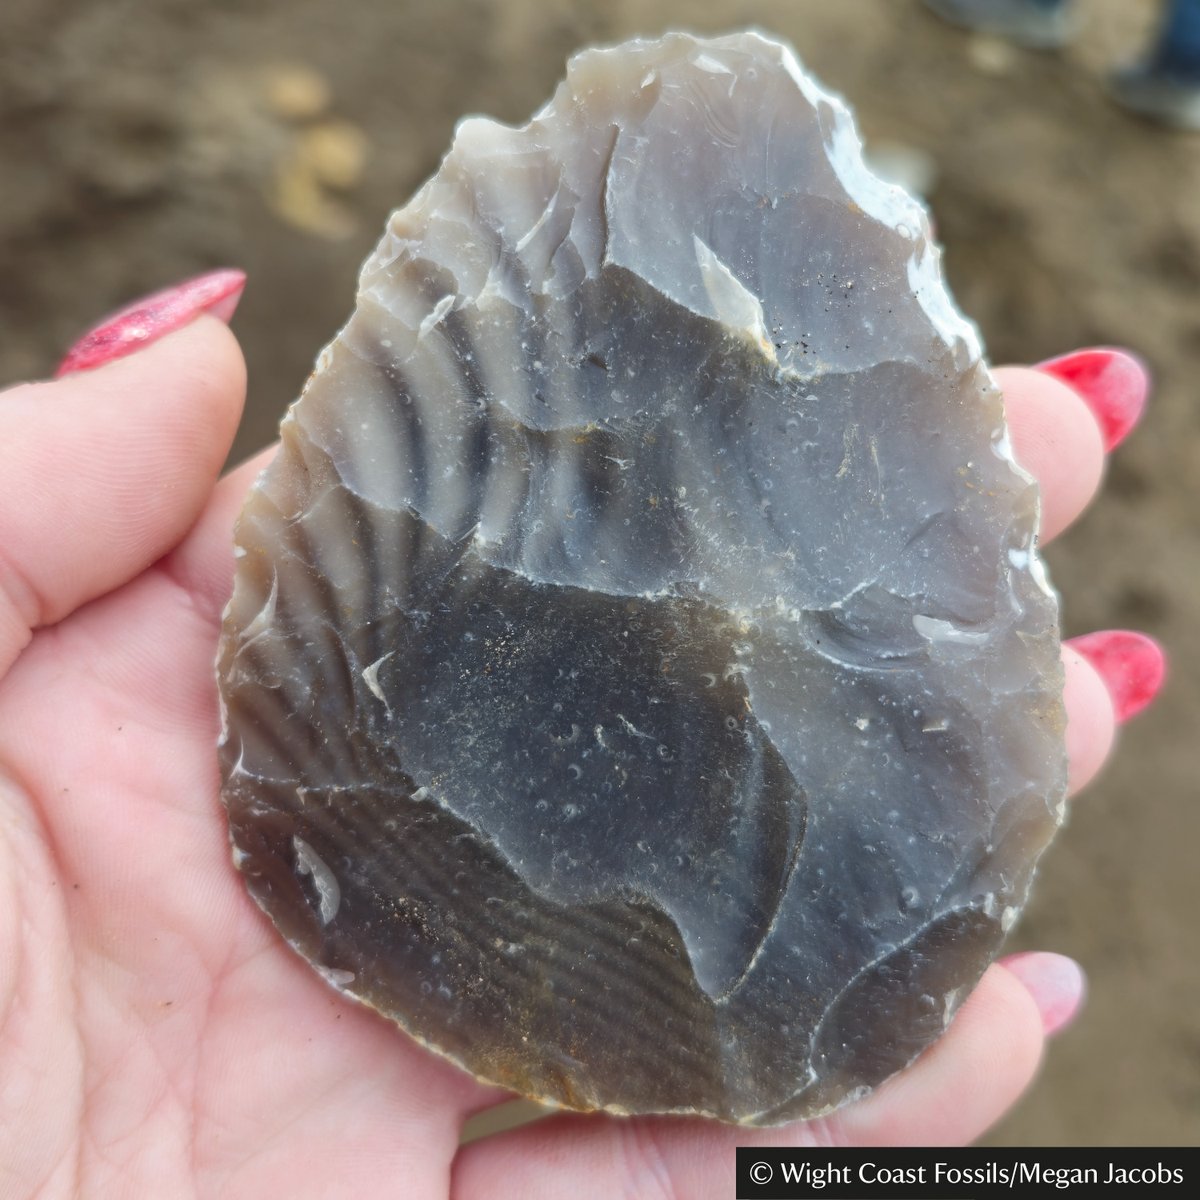 This handaxe was recently found on an @IOWFossils walk & reported to the local archaeological team. Reporting means you can find out what you've discovered & help us understand our shared past. What might you find on a guided fossil walk? Book a place at bit.ly/NTFossil